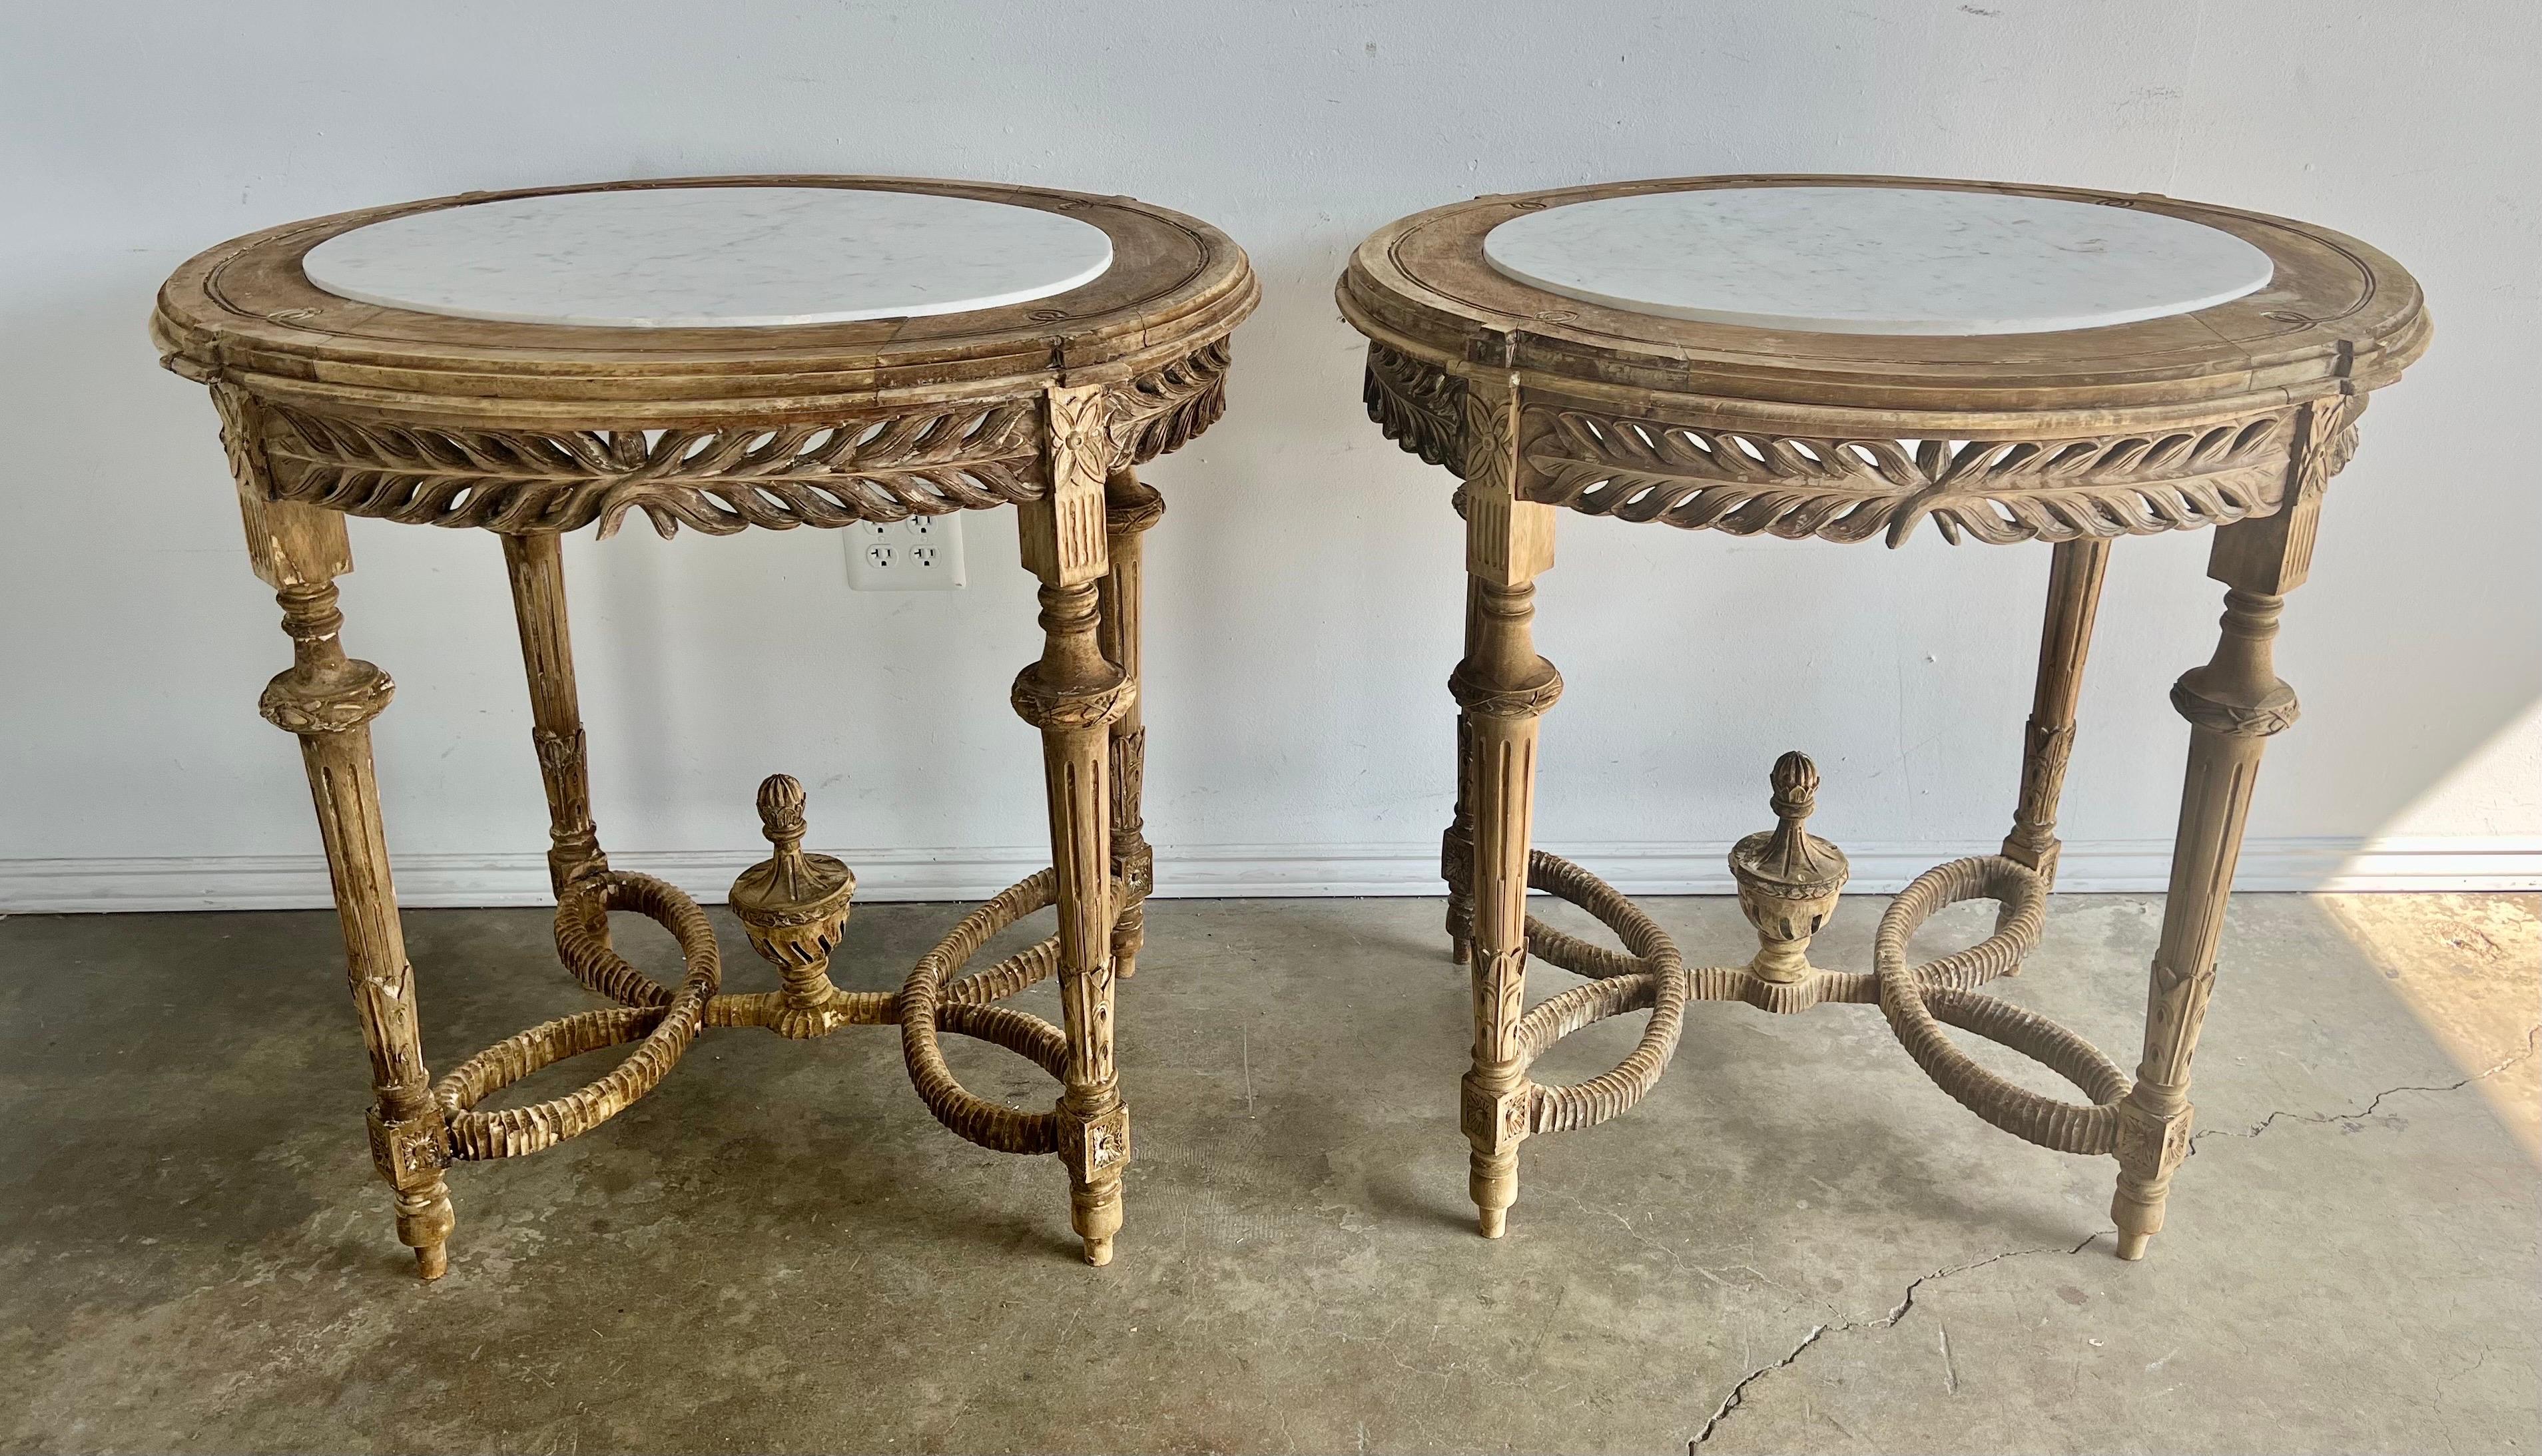 Pair of early 20th century bleached wood oval shaped French Provincial style tables with inset white marble tops. The tables stand on four straight legs with a unique braided rope stretcher that has a carved wood urn in the center. They have white